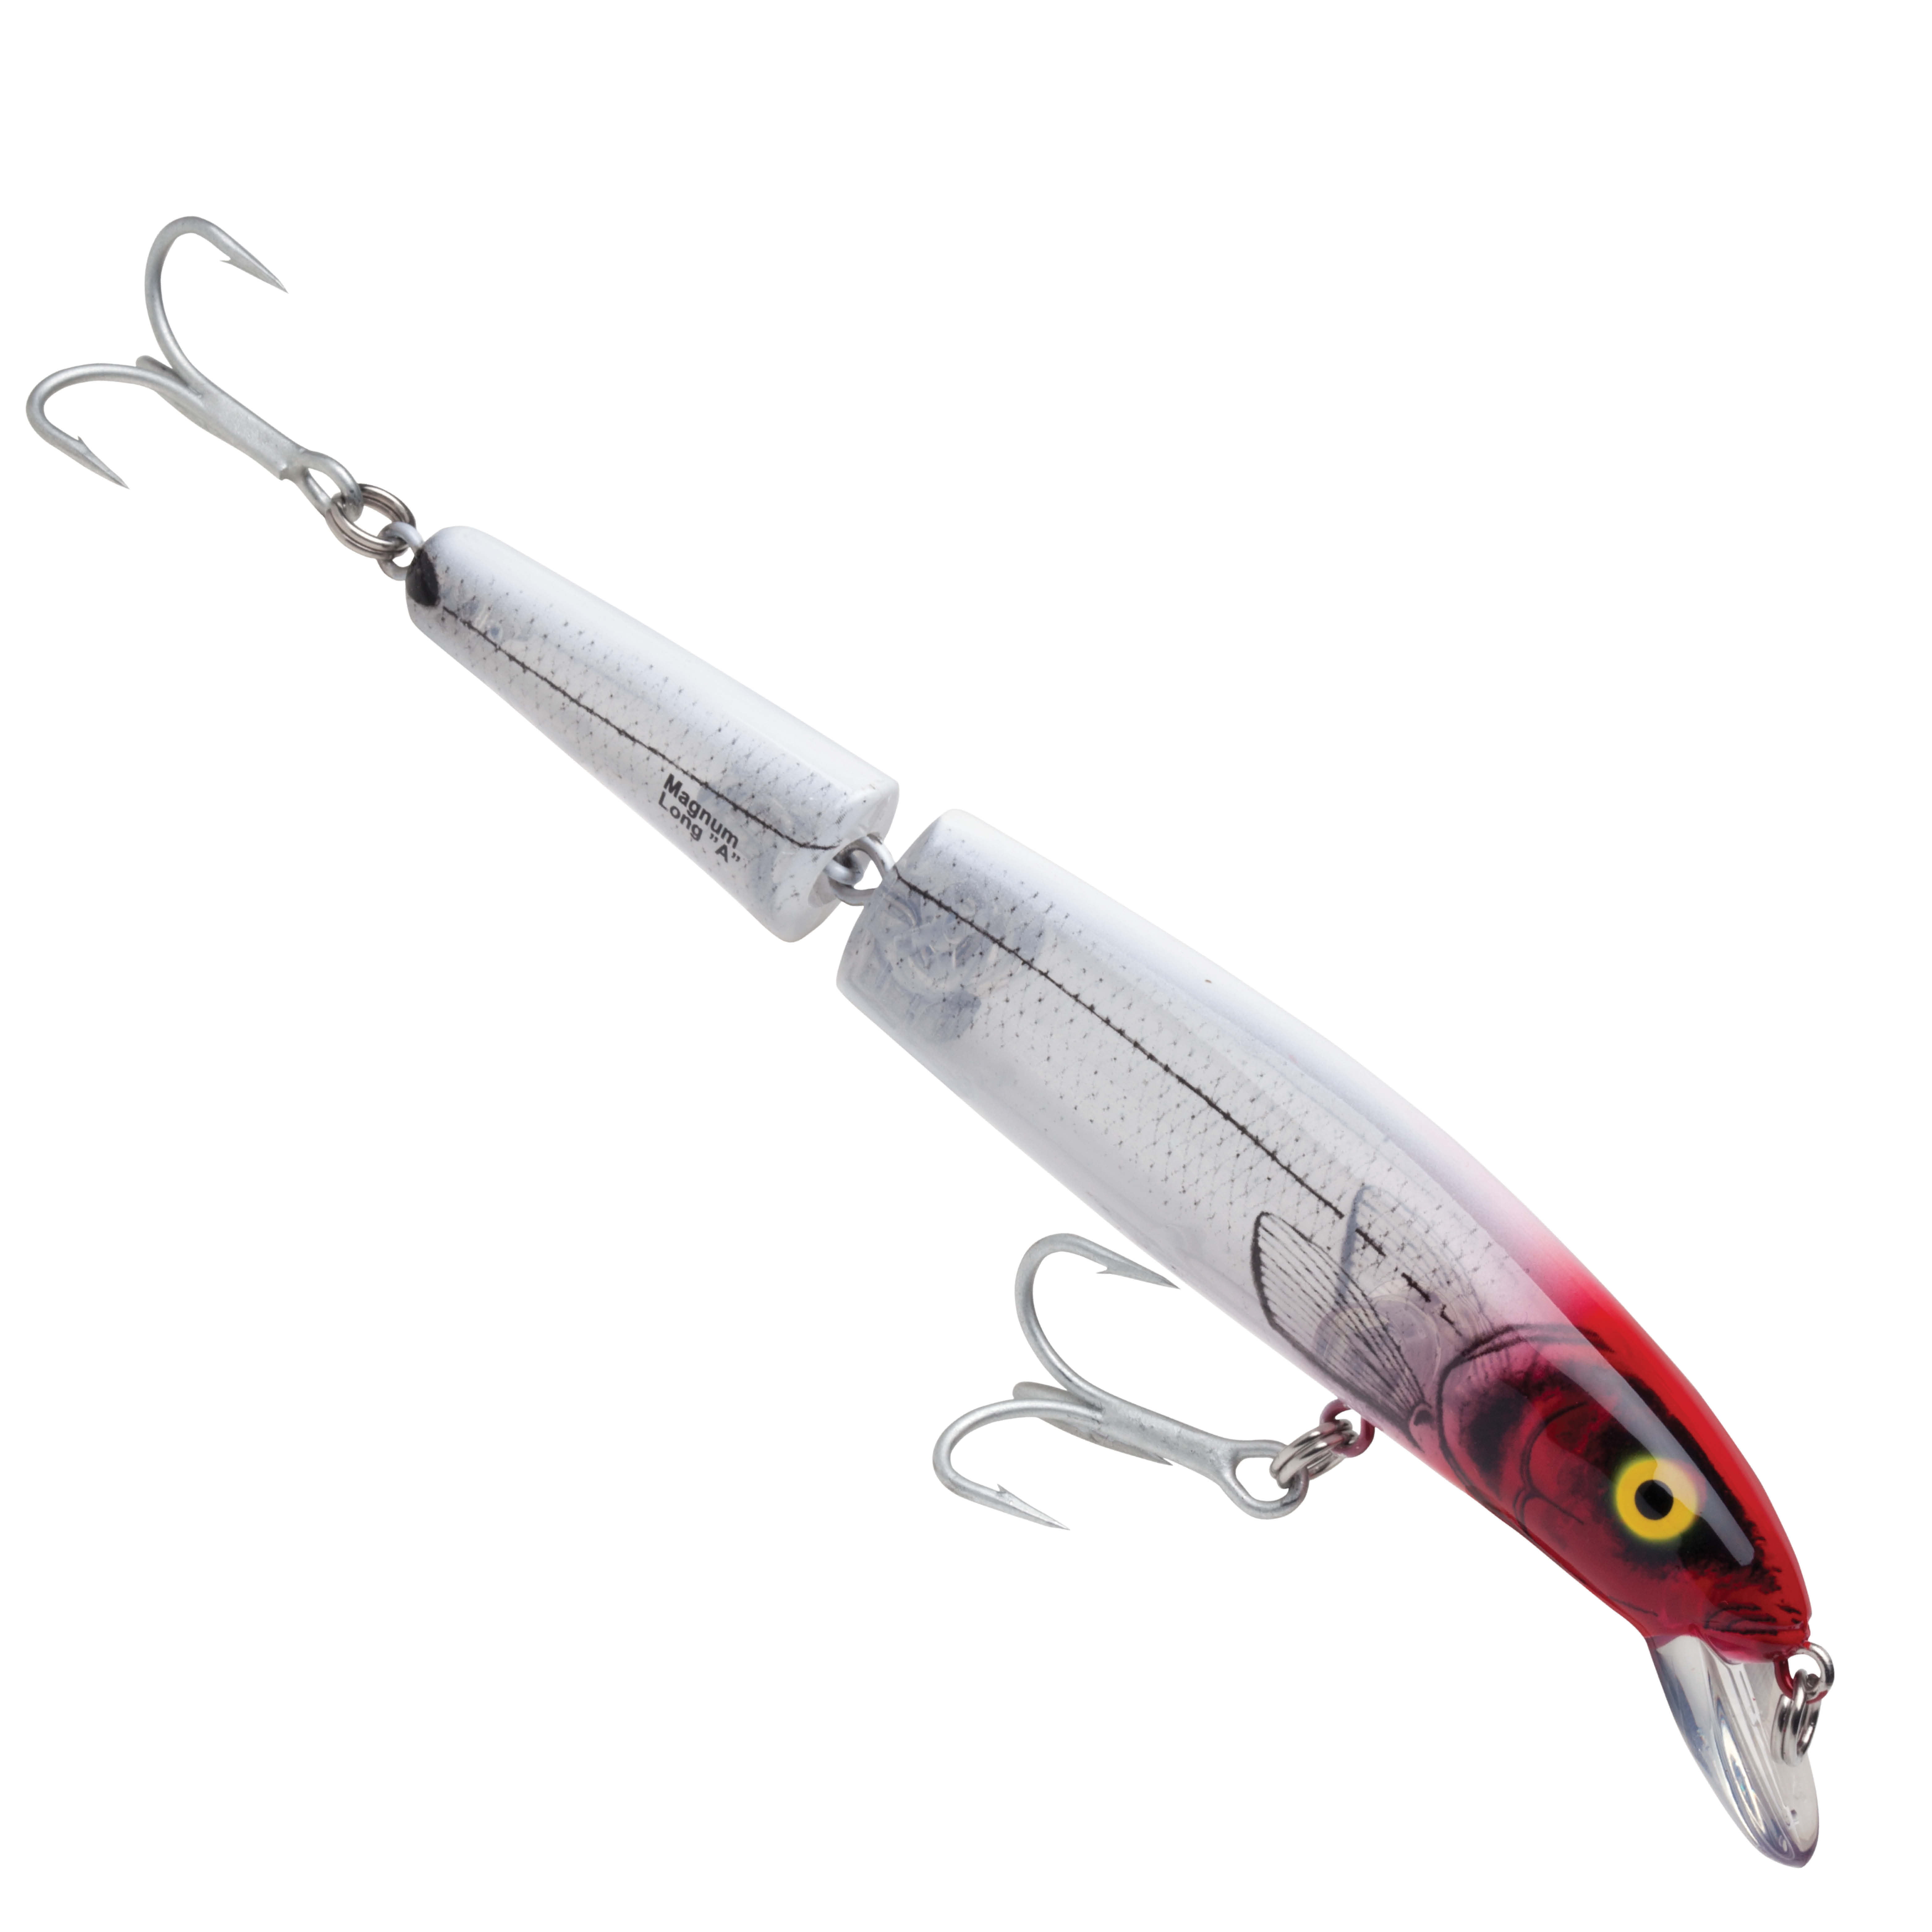 Bomber W6 Wind-Cheater BSWW6 6 Saltwater grade fishing lure new